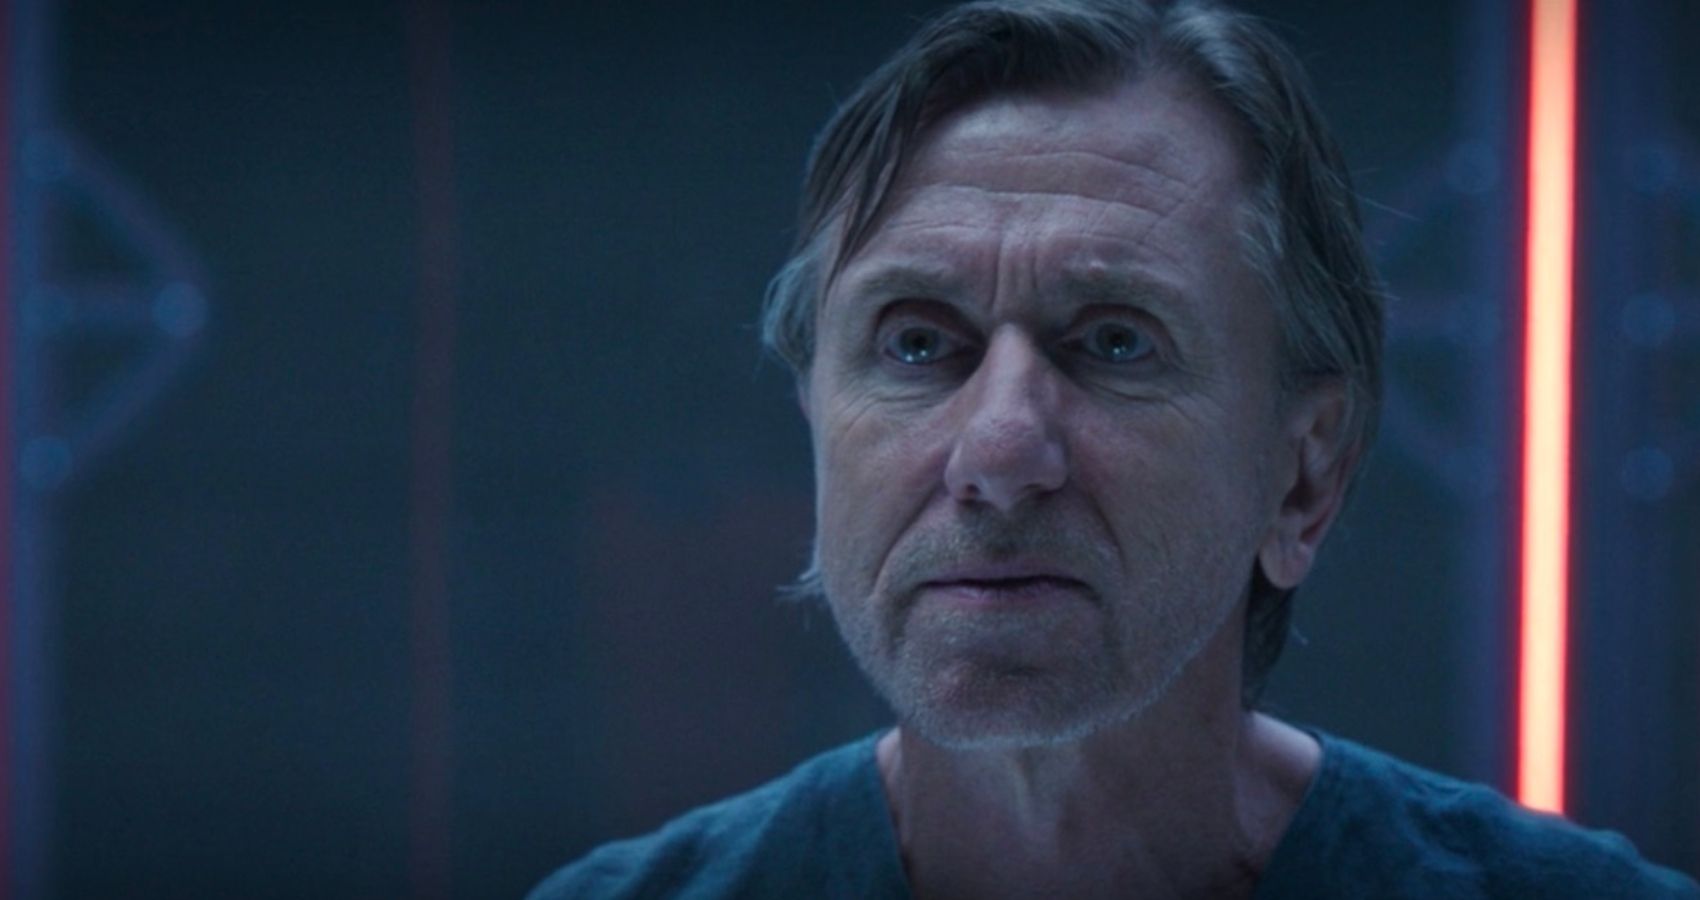 She-Hulk: Attorney at Law Case Files: Tim Roth on Returning as